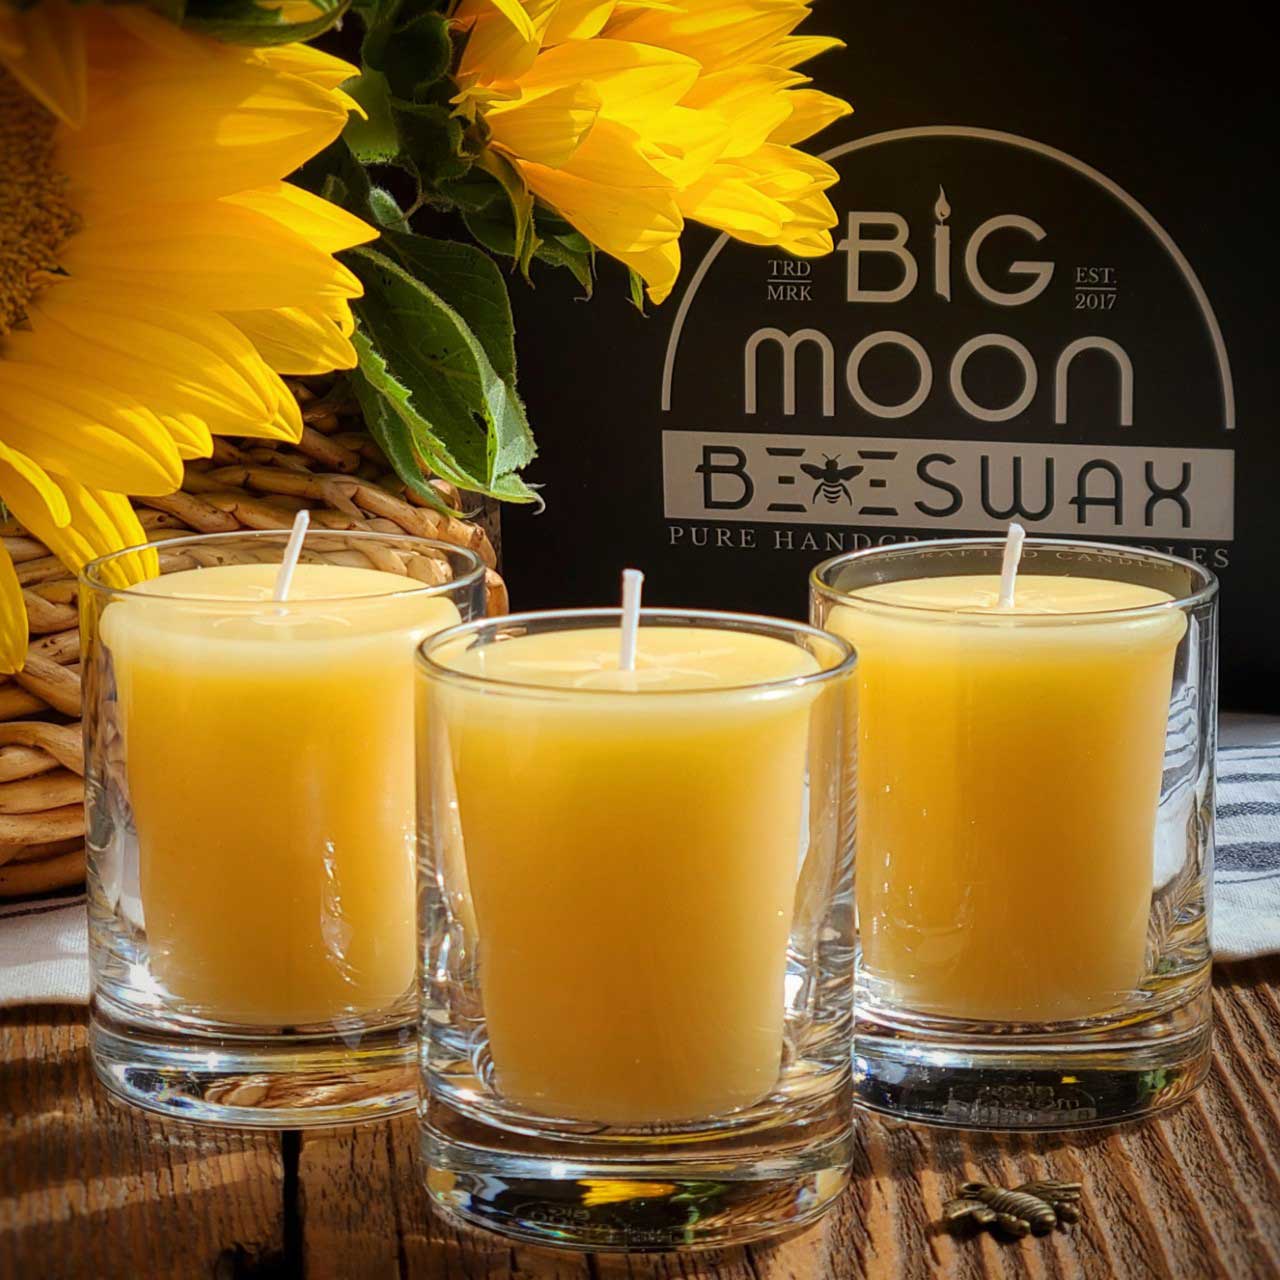 beeswax votive candles in glass votive holders